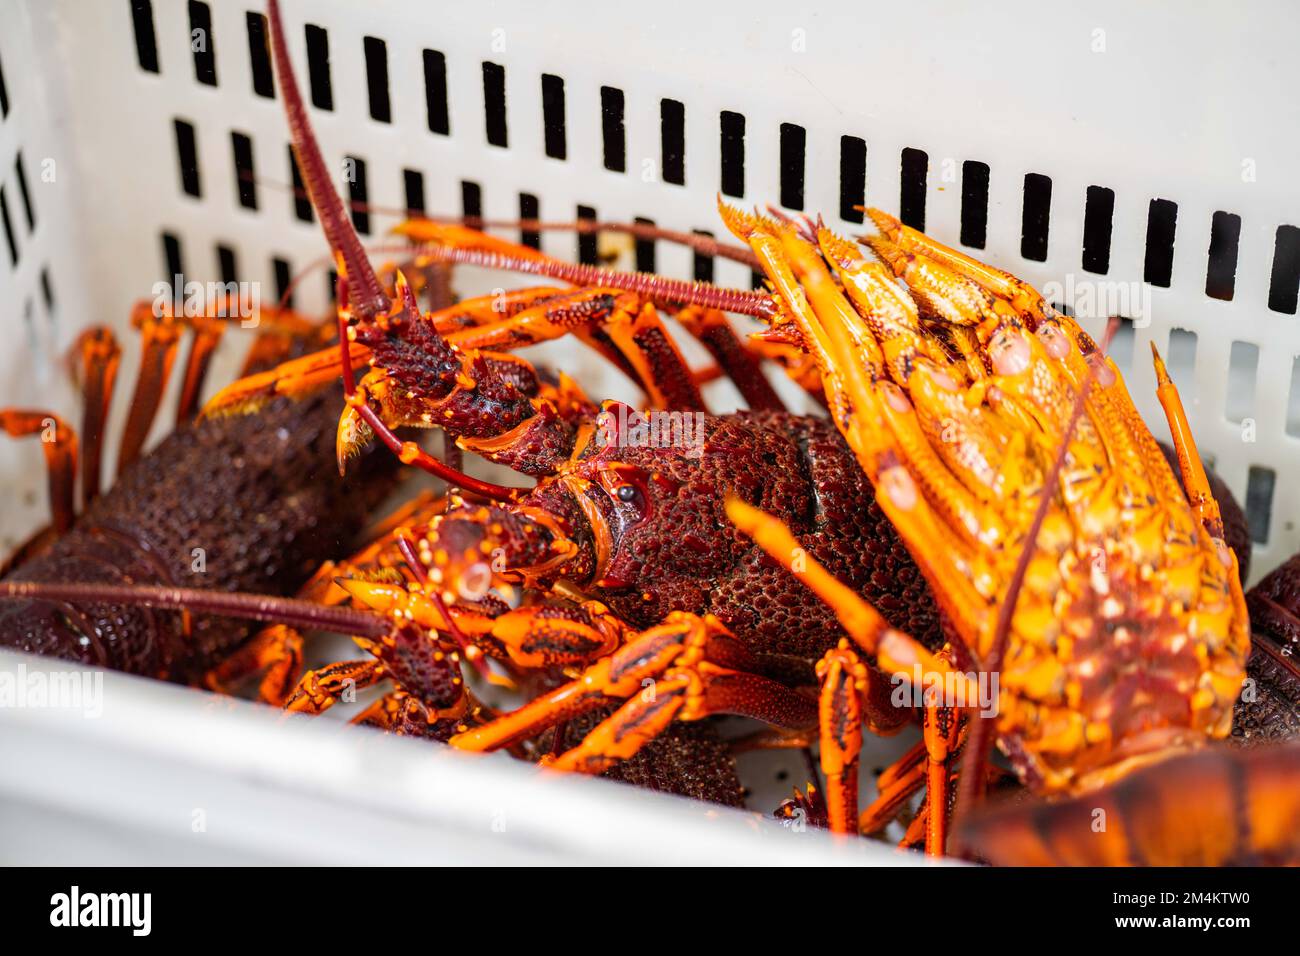 Catching live Lobster in America. Fishing crayfish in Tasmania Australia. ready for chinese new year in china Stock Photo